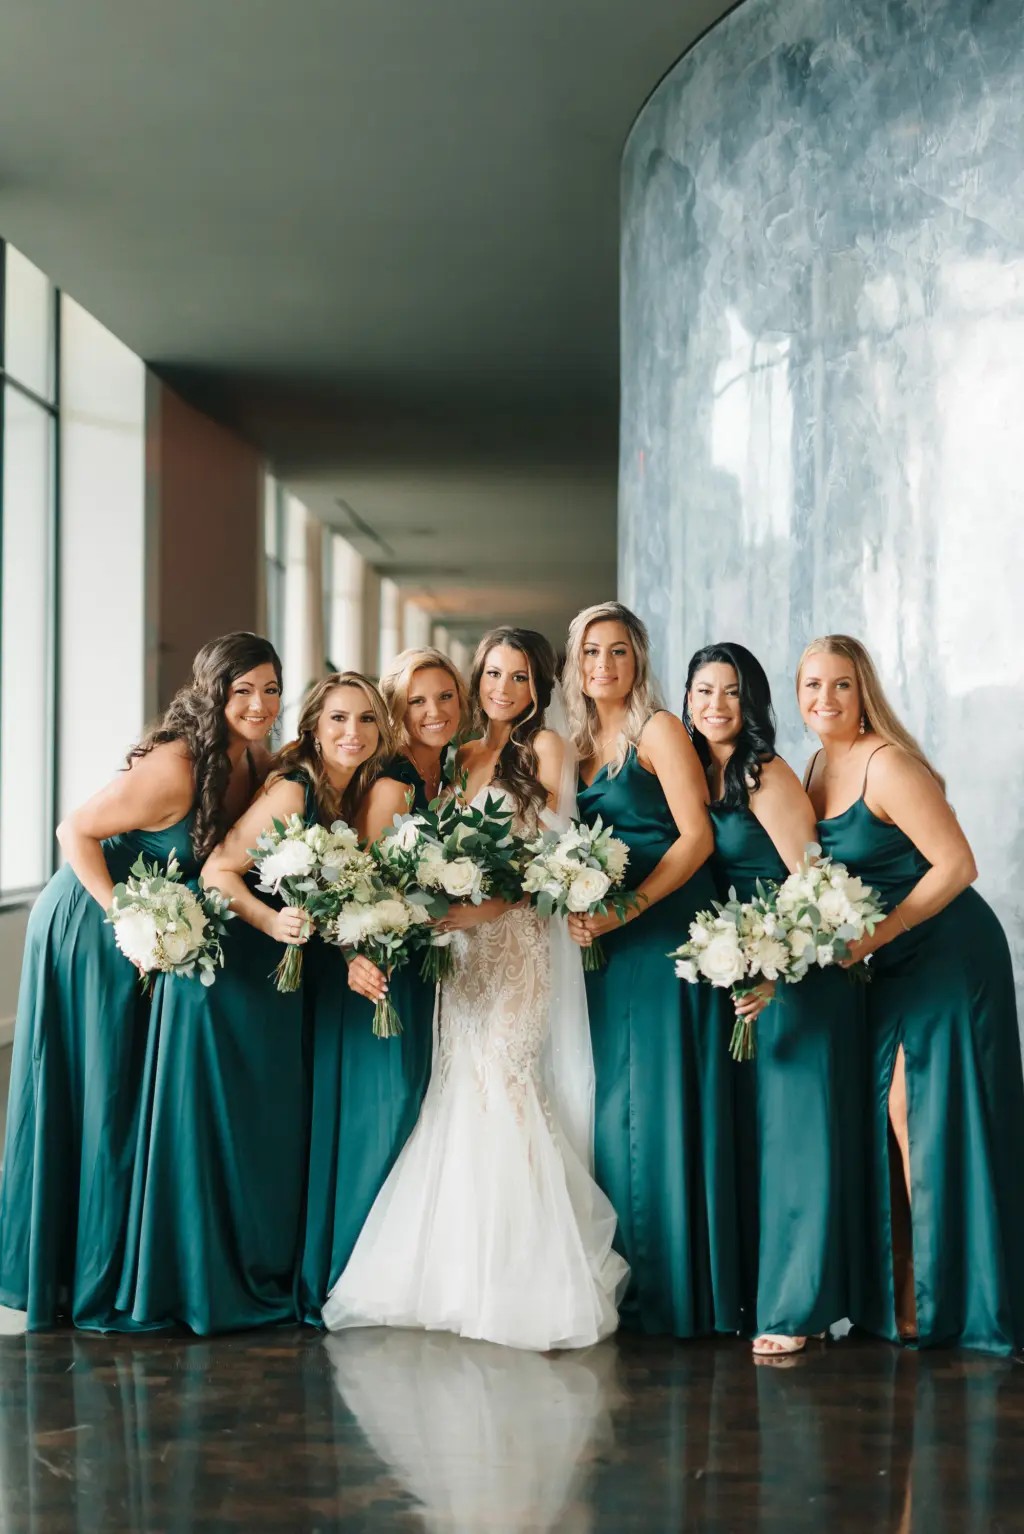 Bride with Bridesmaids in Emerald Floor Length Bridesmaids Dresses and White and Greenery Floral Wedding Bouquet Ideas Portrait